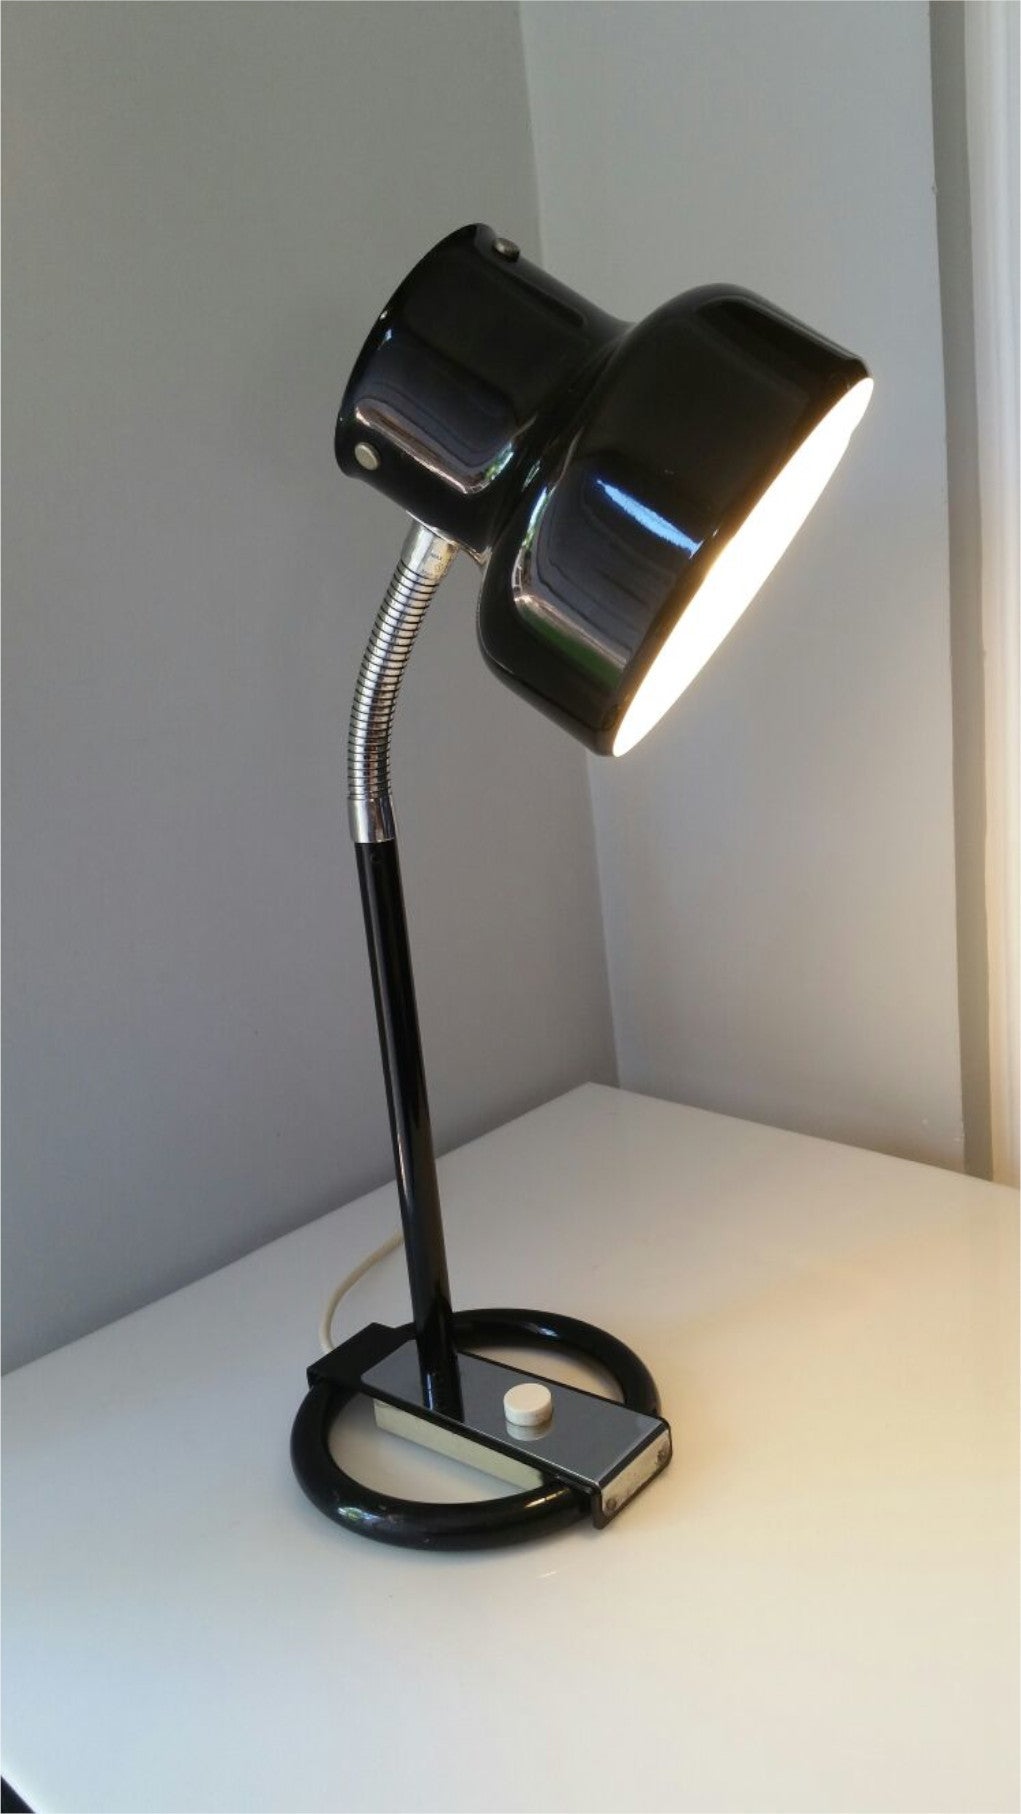 Lamp designed by Anders Pehrson in the 1960s in a very unusual tabletop model with a flexible adjustable head. In chrome and black.